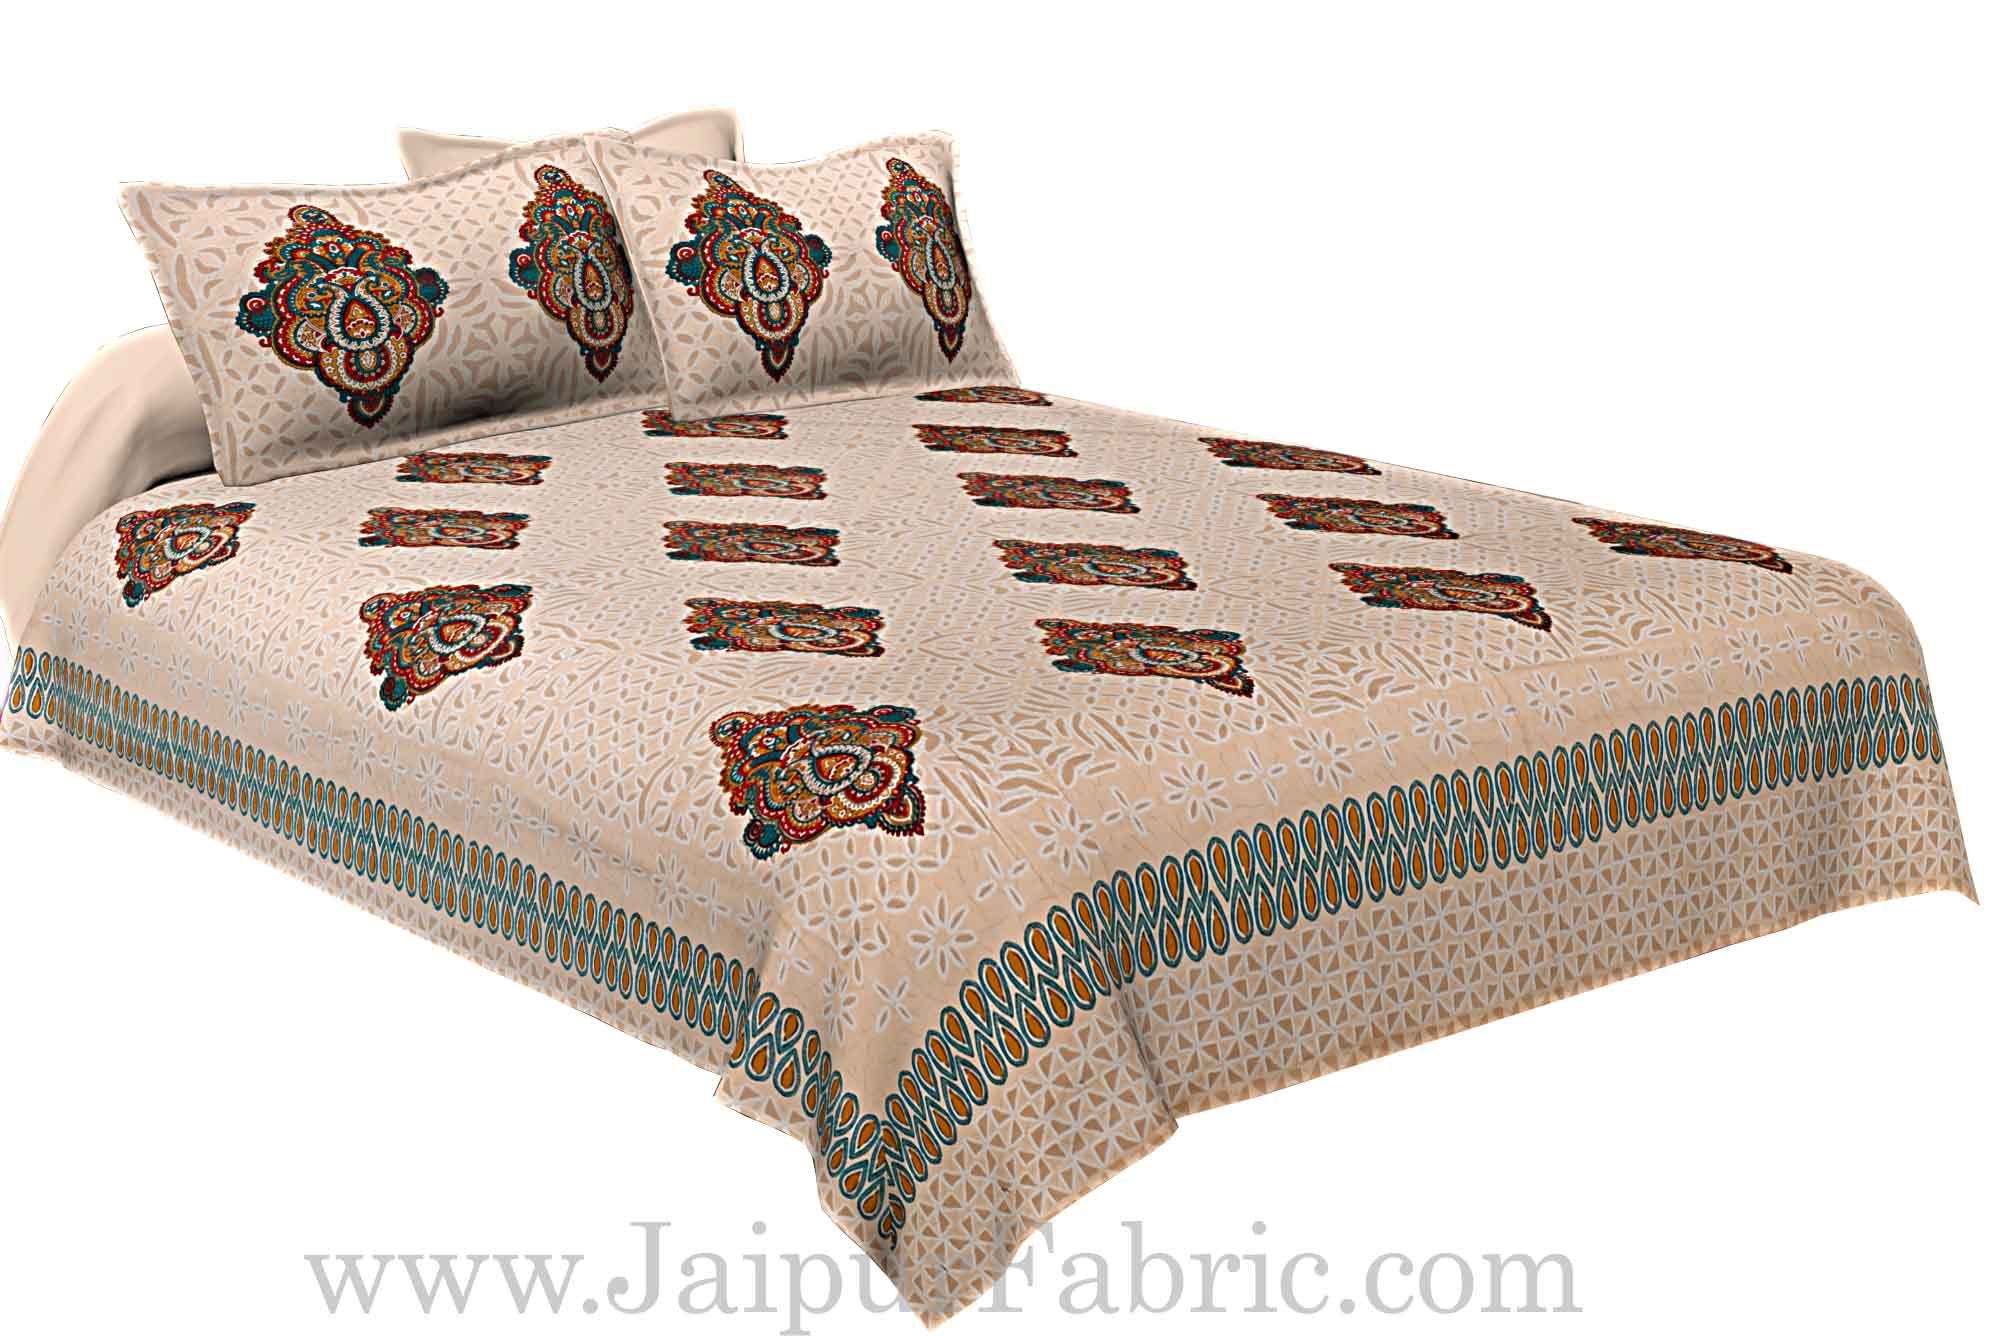 Double Bed Sheet Cream Base With Boota Block  Print Super Fine Cotton